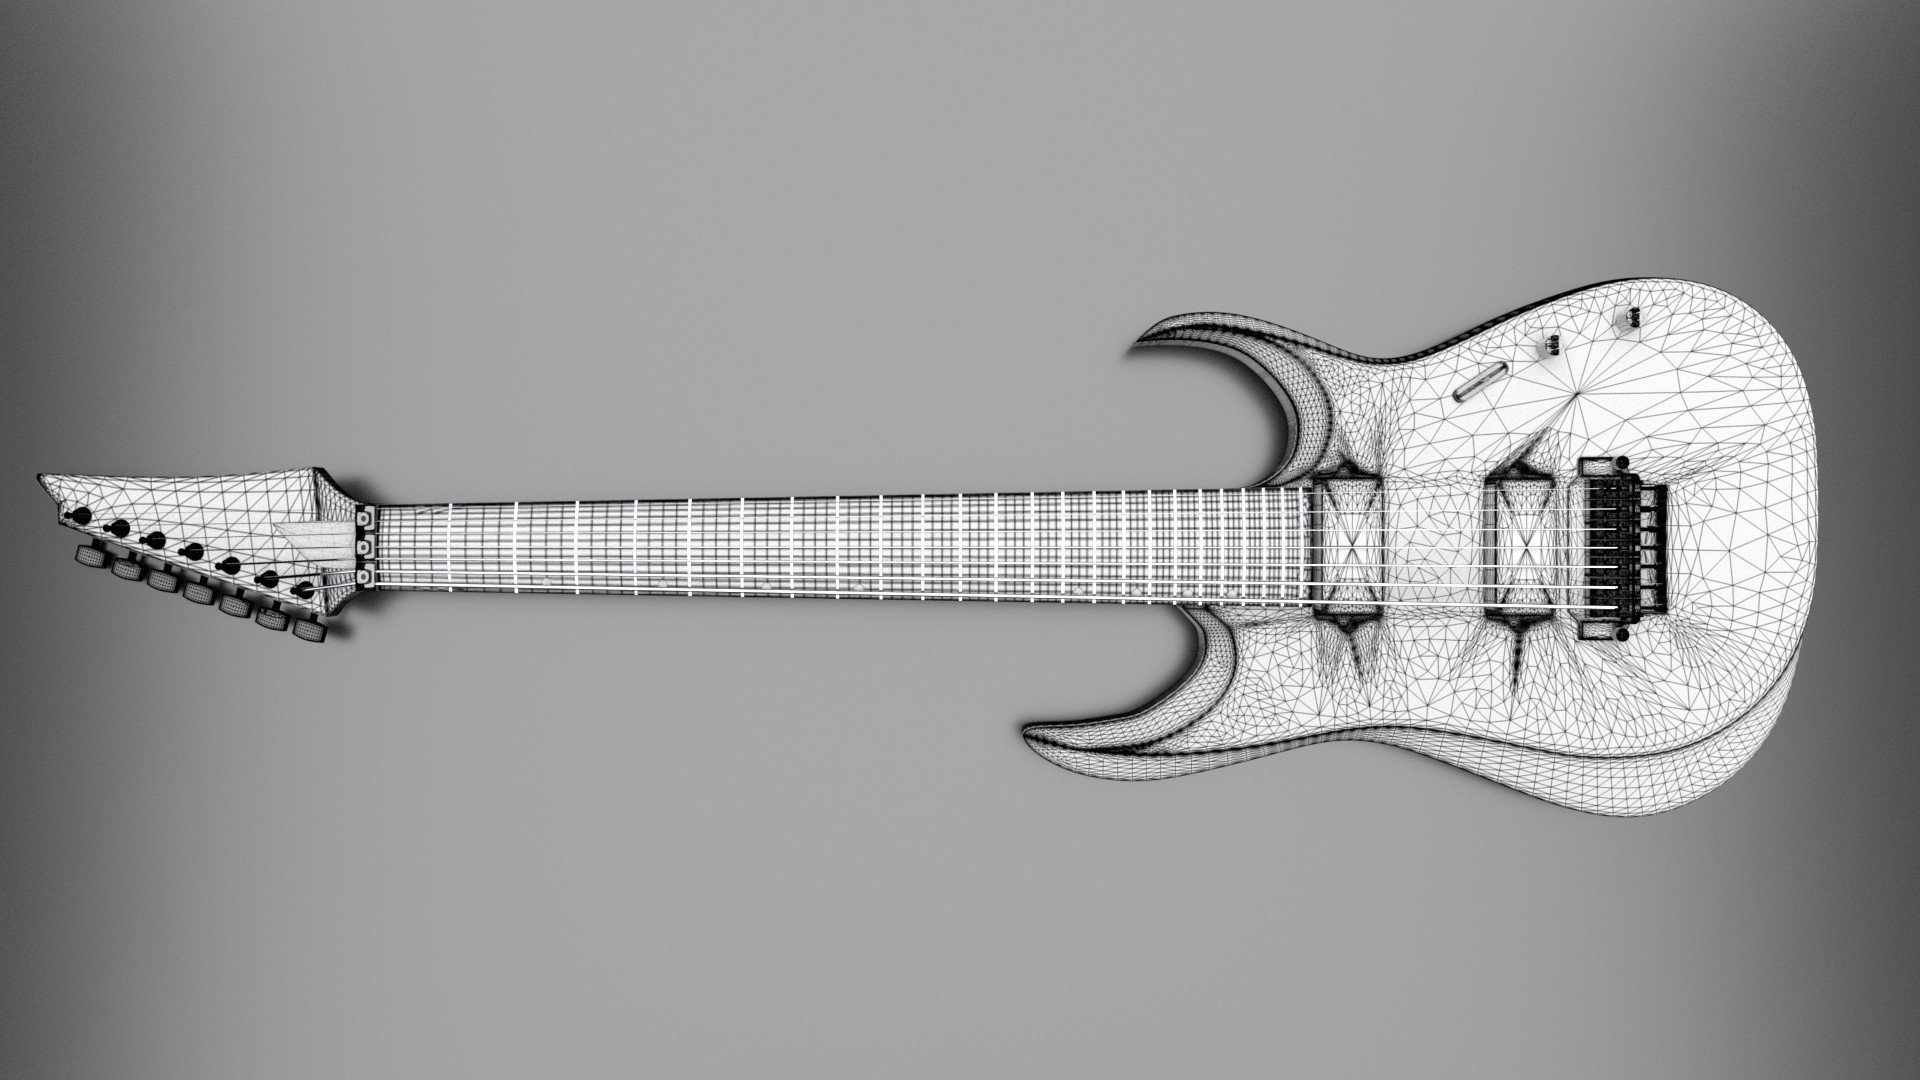 Ibanez 7 String Electric Guitar   3D Model by Agungkuncoro